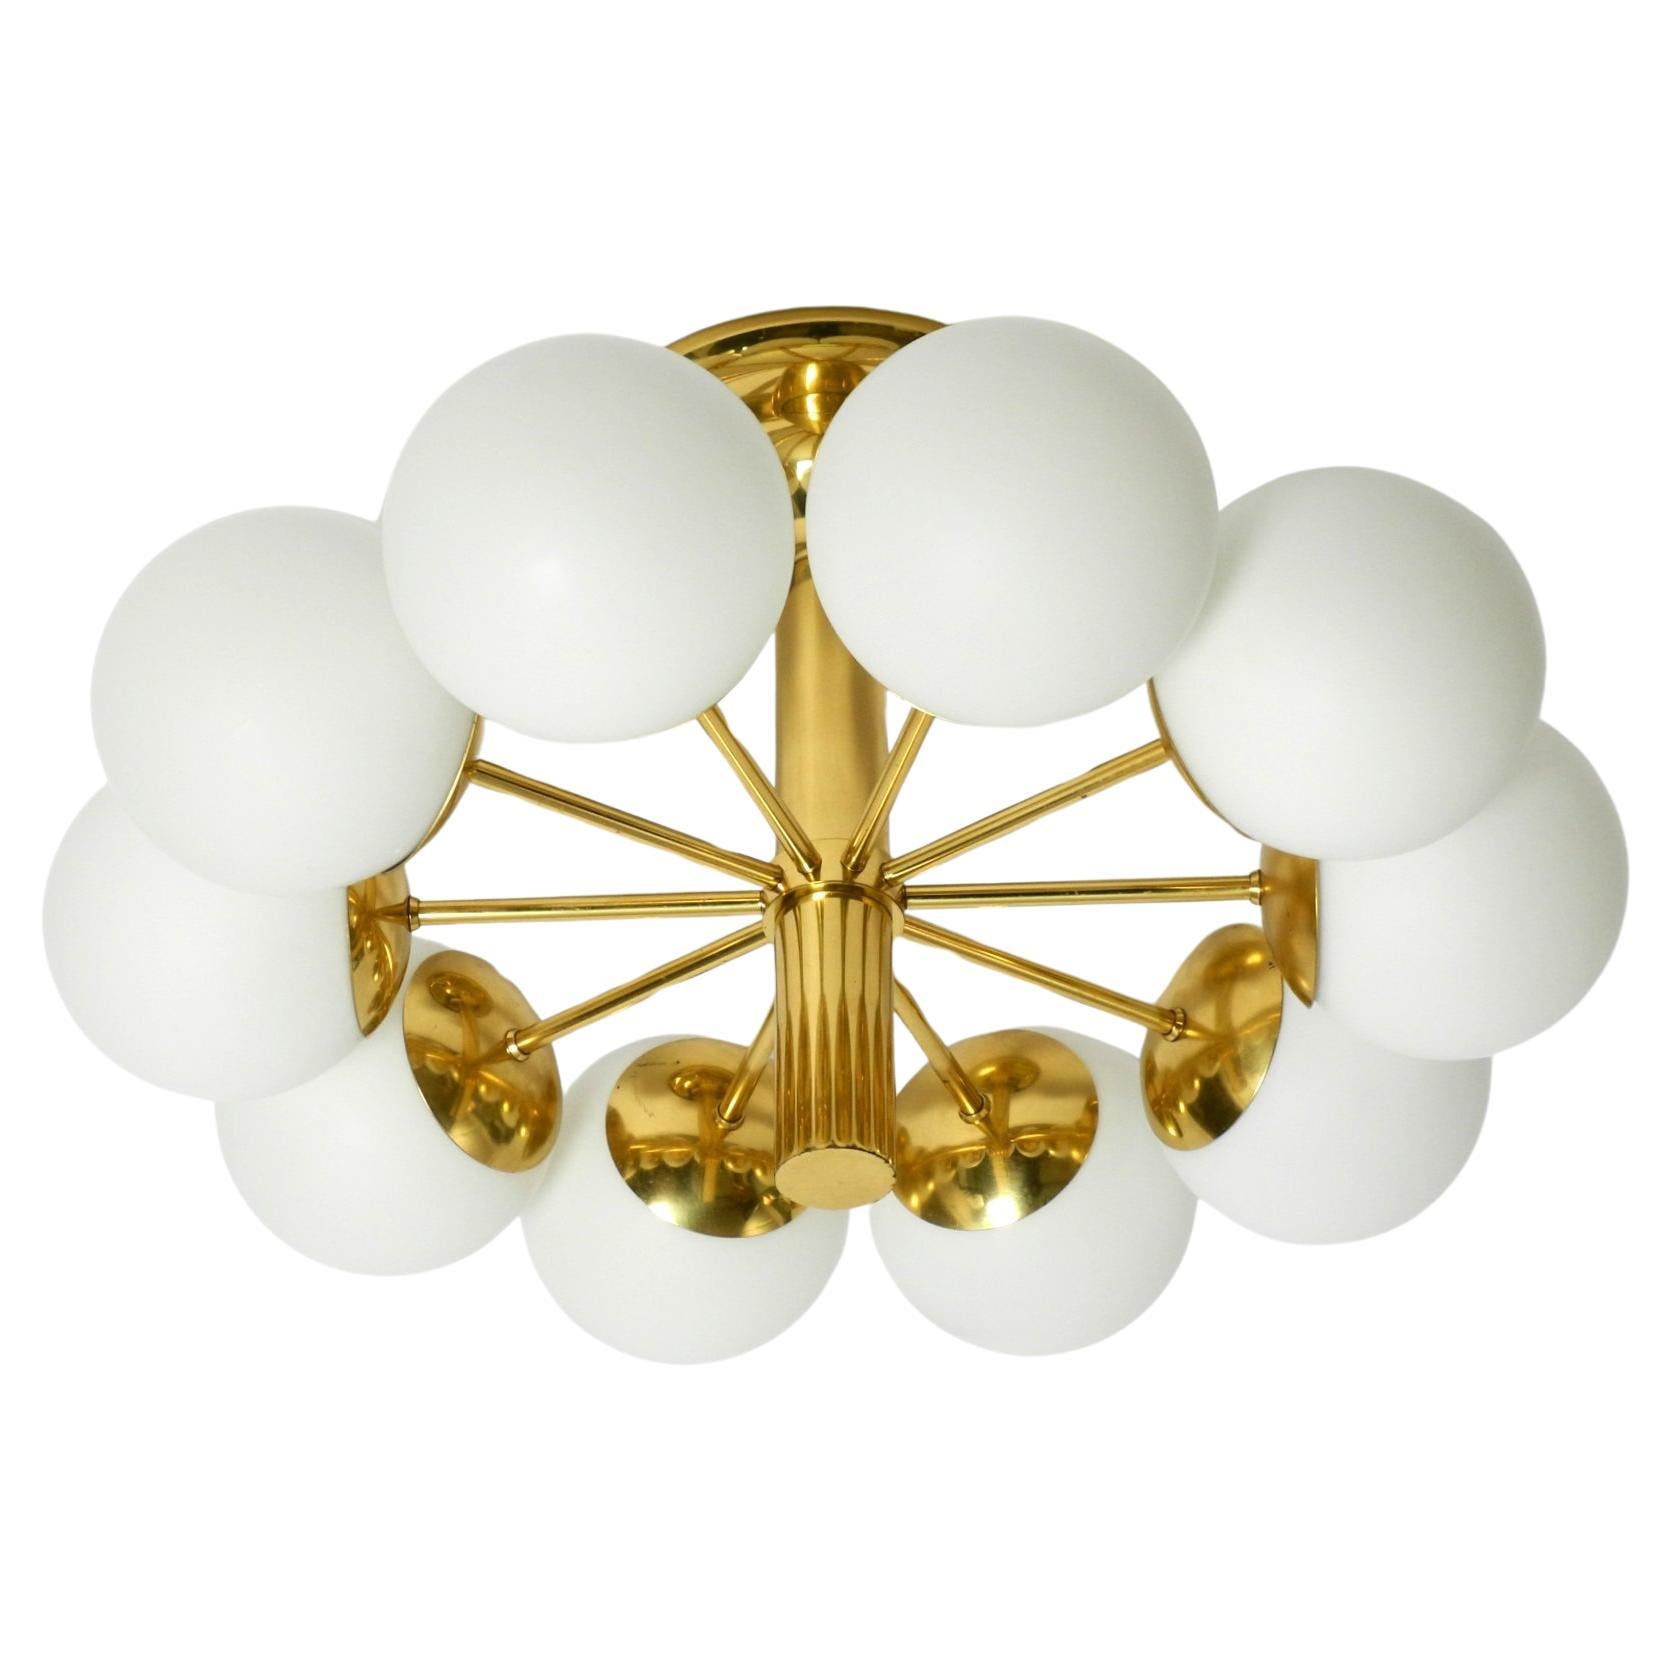 1960s Space Age brass ceiling lamp with 10 glass balls by Kaiser Leuchten For Sale